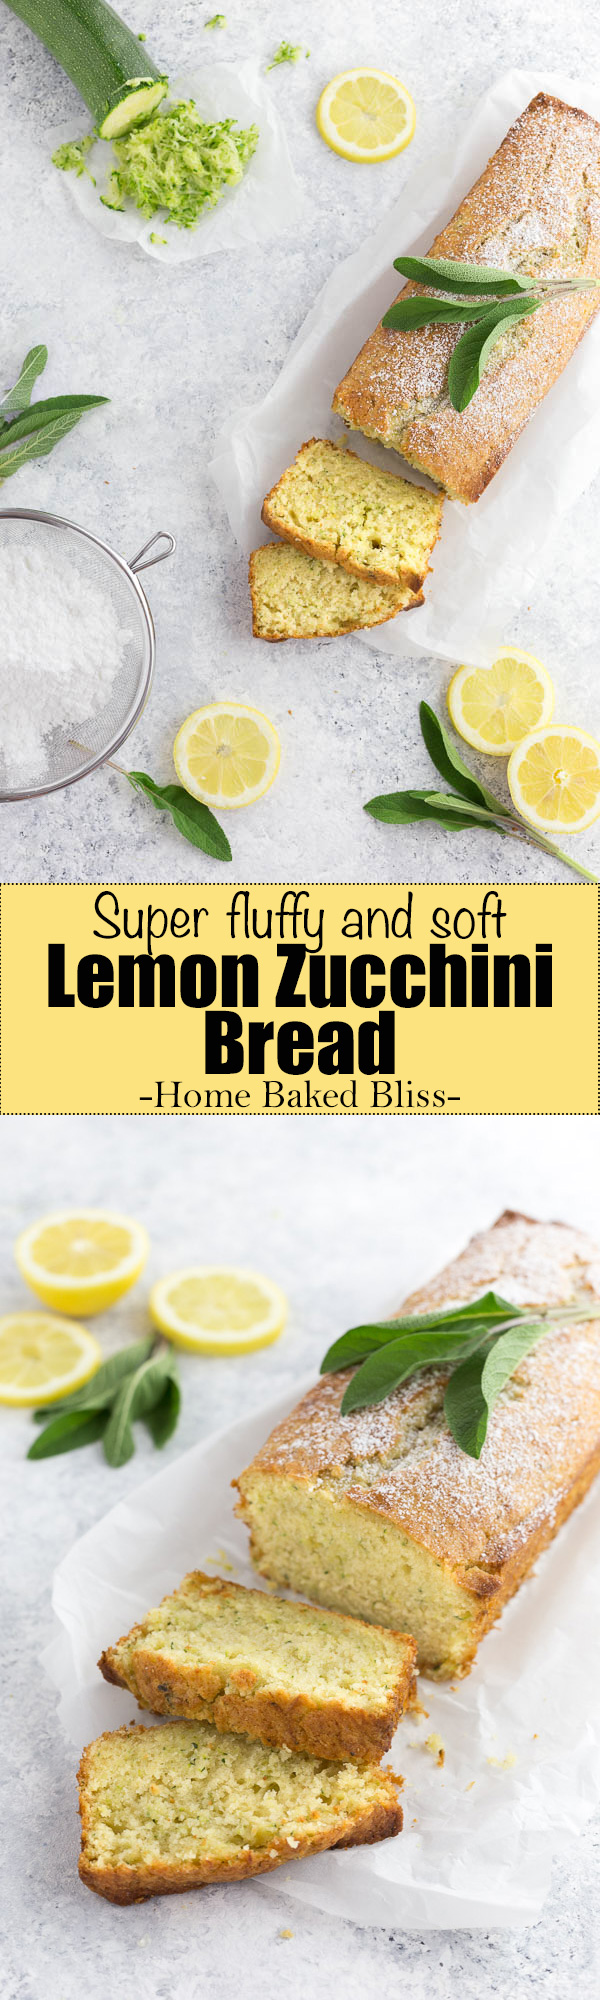 A soft and fluffy lemon zucchini bread. The perfect quick bread for summer!